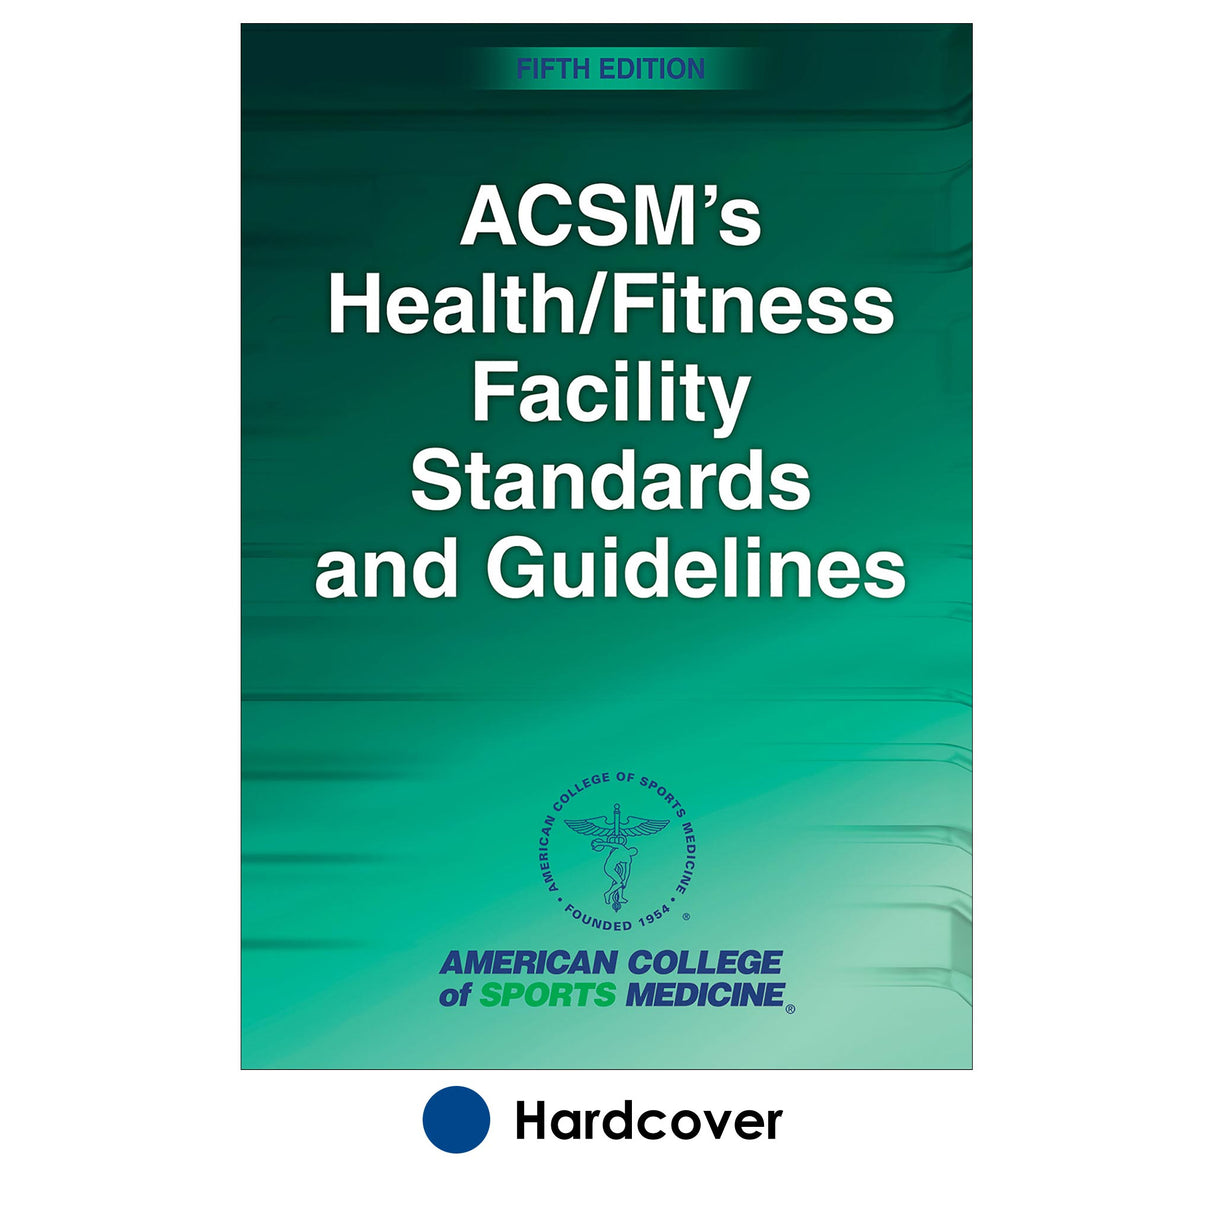 ACSM's Health/Fitness Facility Standards and Guidelines-5E